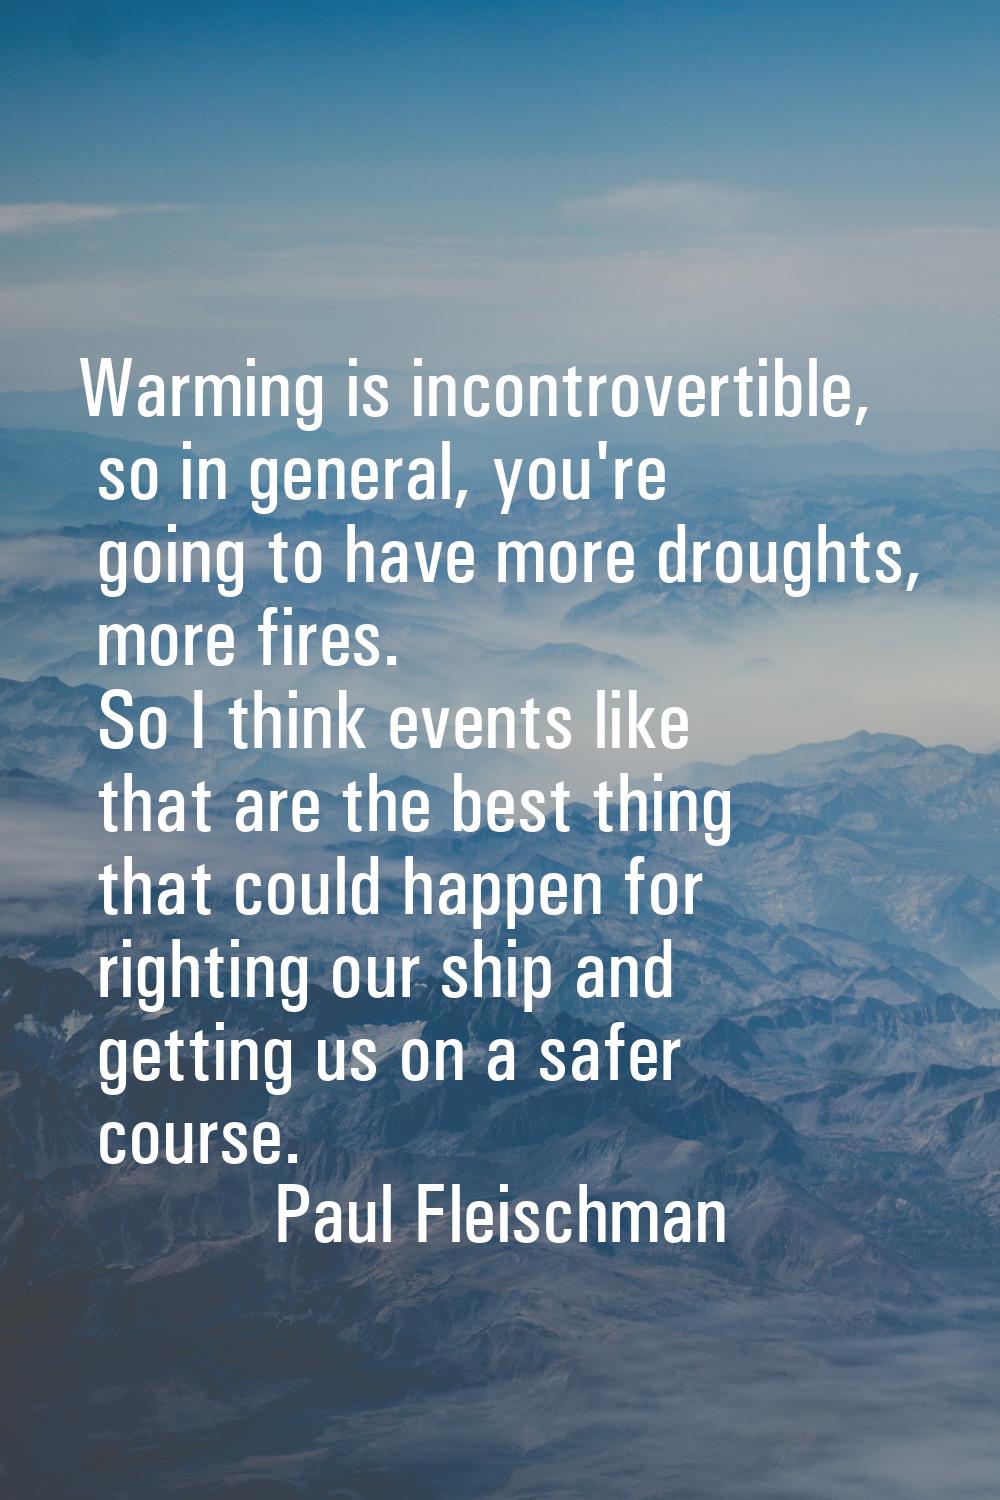 Warming is incontrovertible, so in general, you're going to have more droughts, more fires. So I th